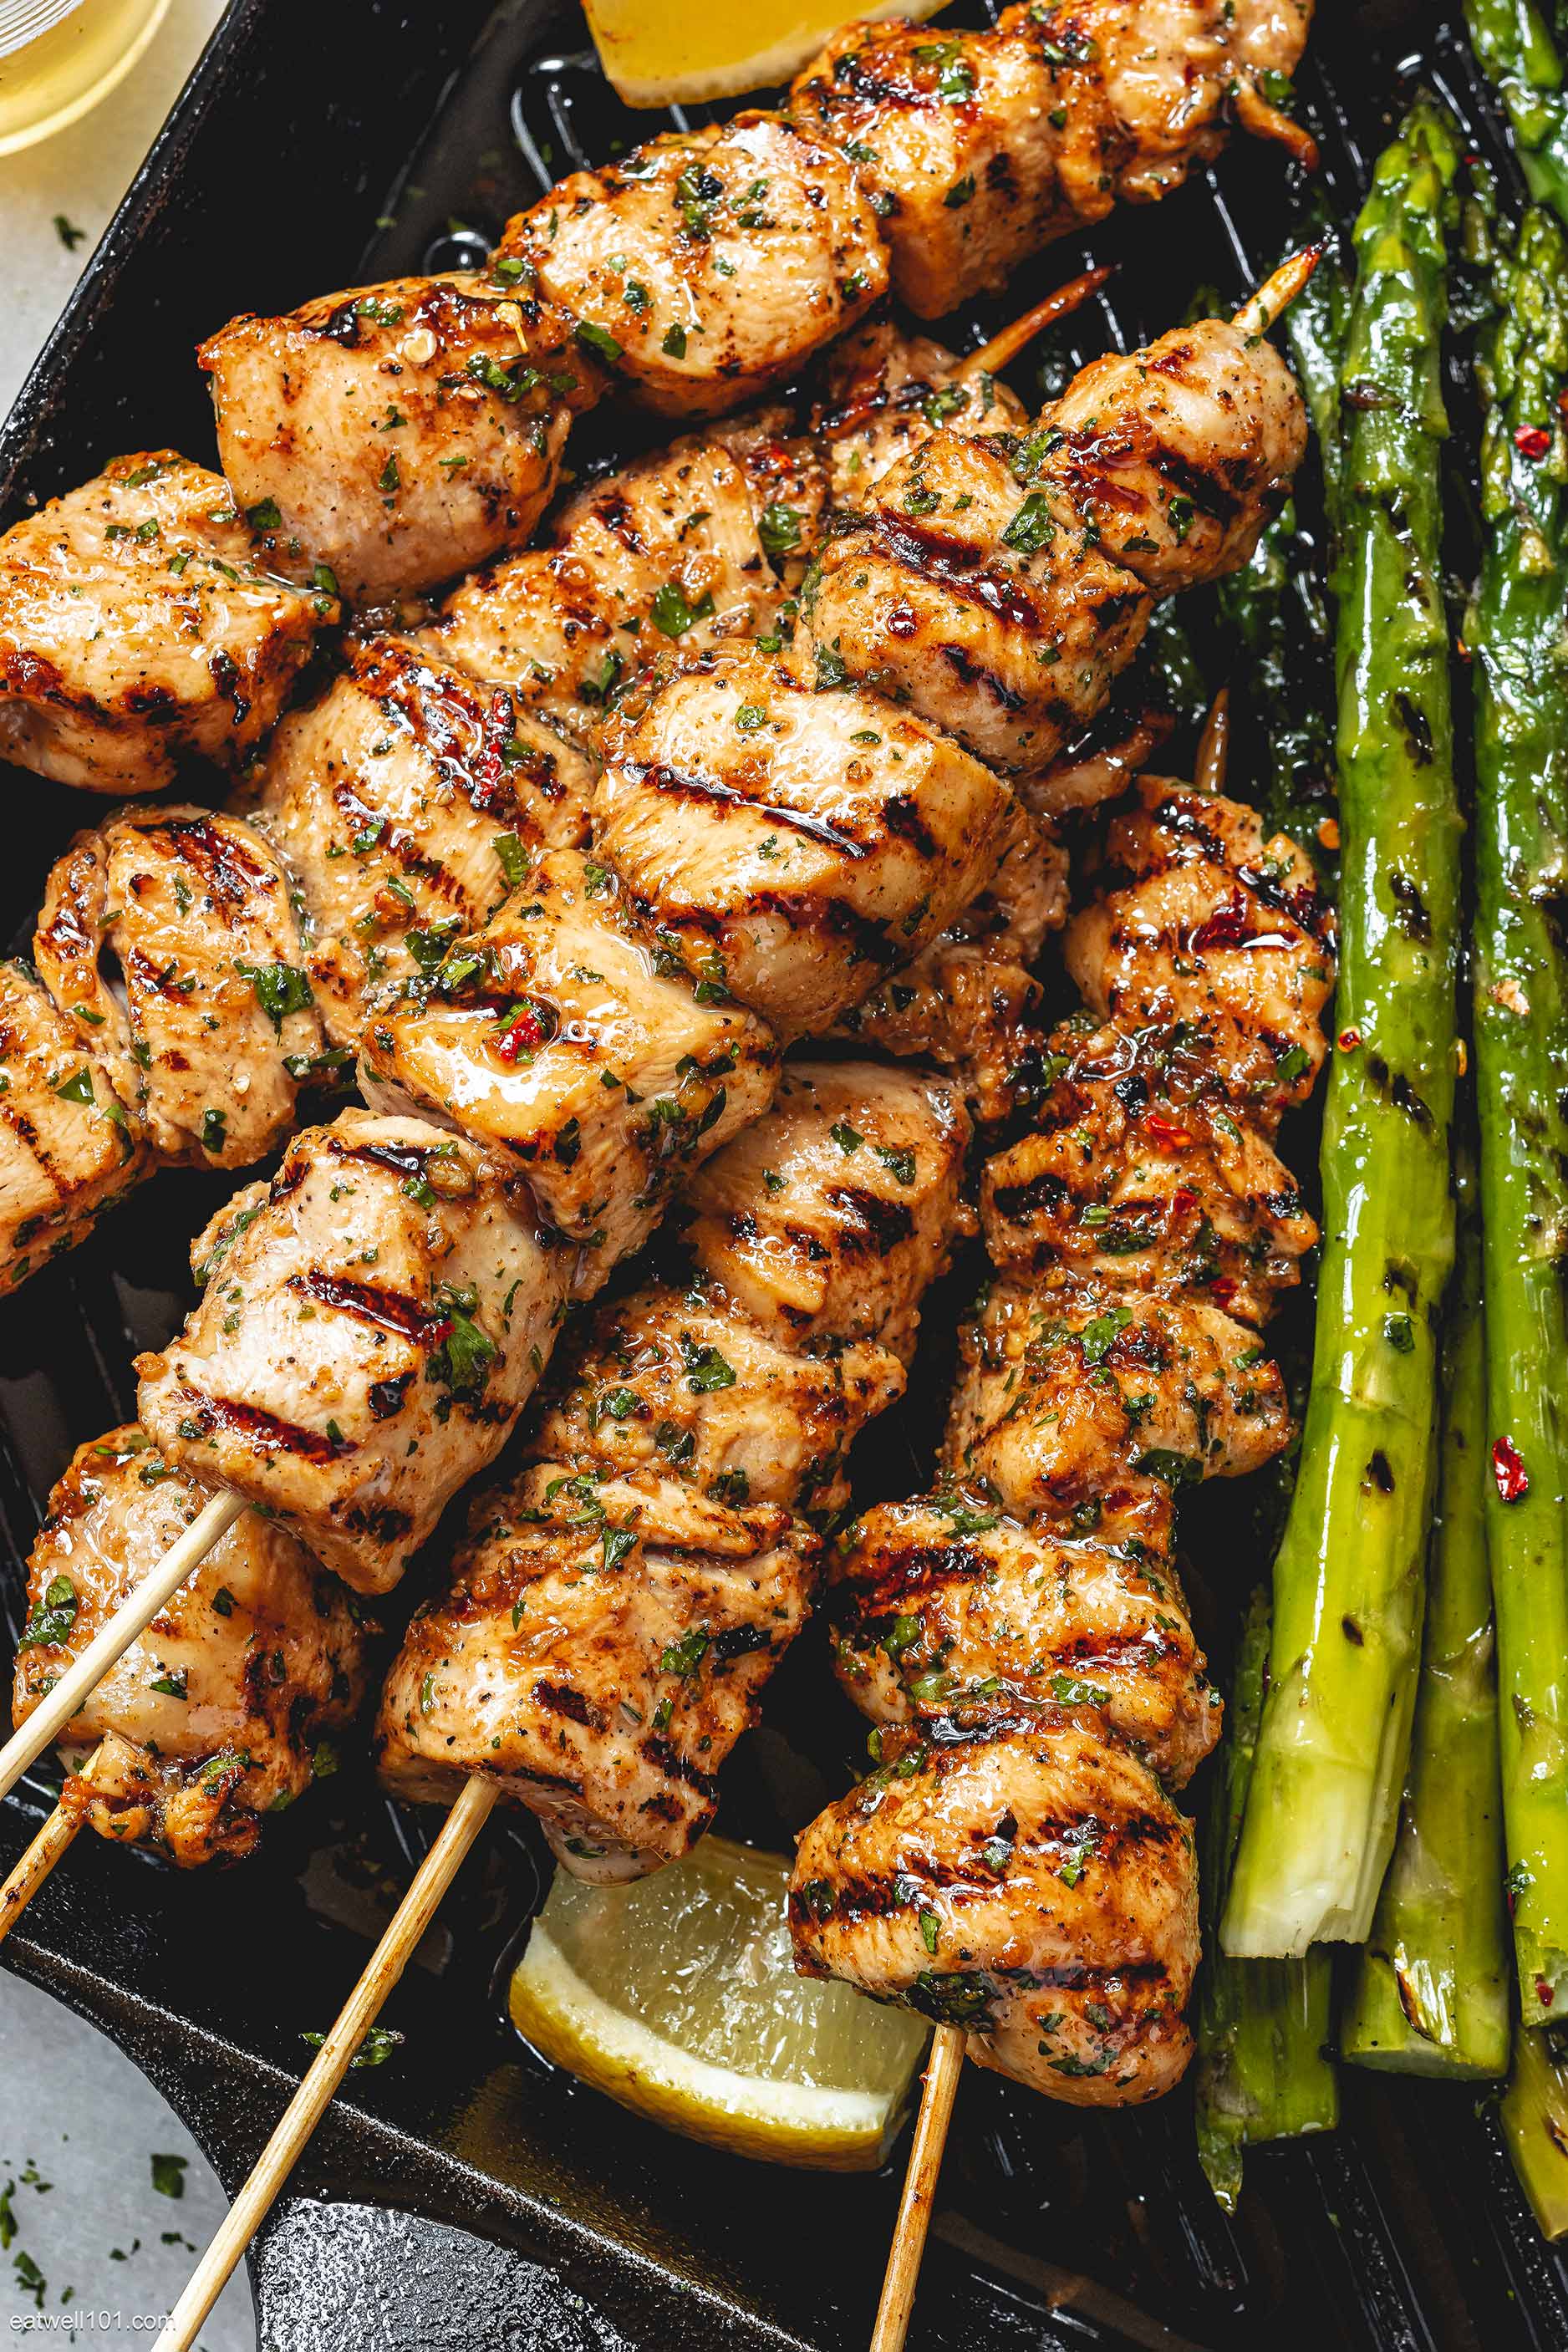 Grilled Chicken Breasts with Lemon Garlic - #recipe by #eatwell101 - https://www.eatwell101.com/grilled-lemon-garlic-chicken-skewers